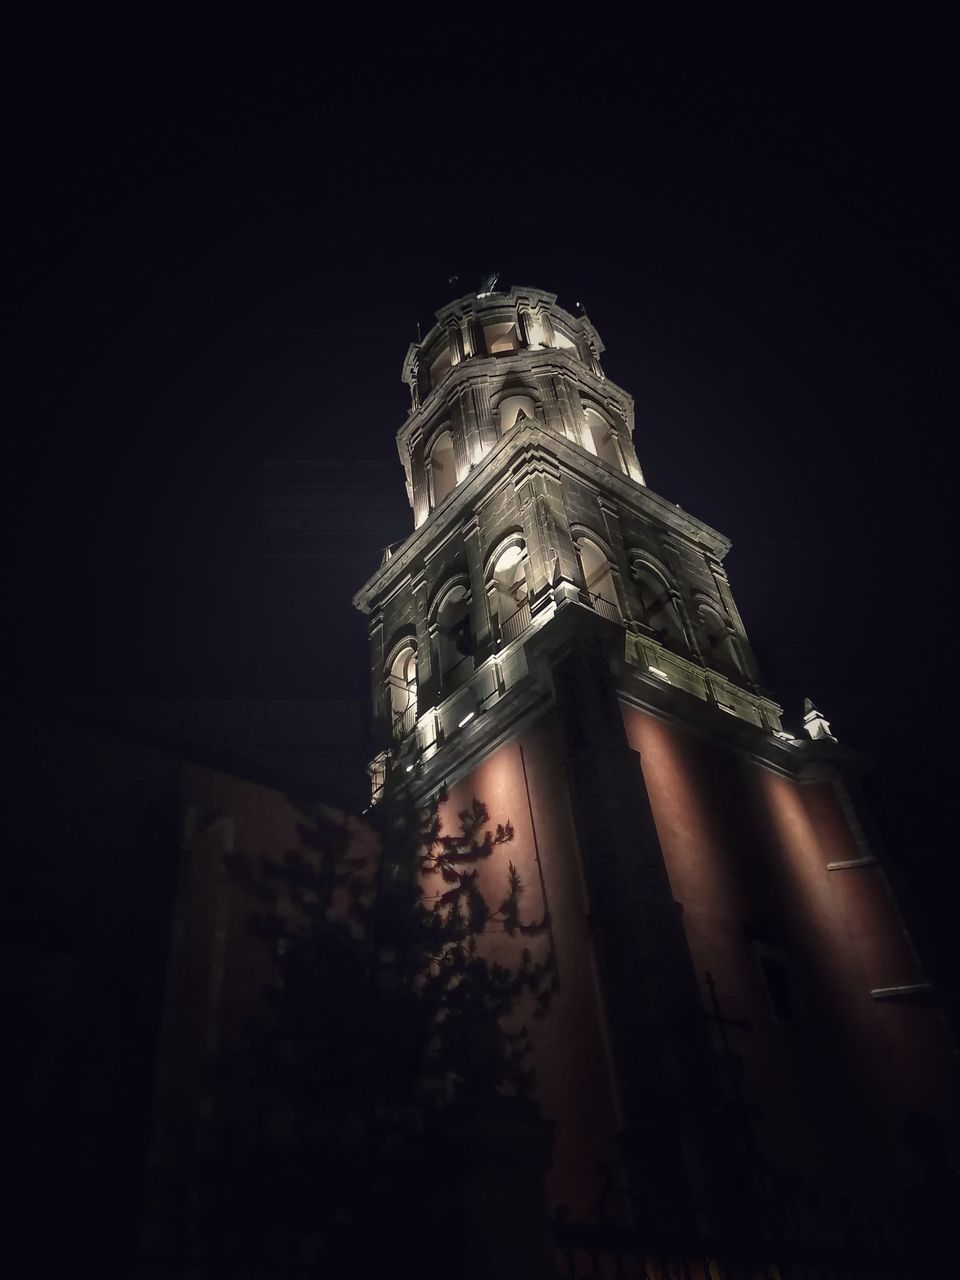 darkness, night, architecture, low angle view, light, built structure, building exterior, no people, history, the past, travel destinations, building, sky, tower, religion, place of worship, nature, city, lighting, illuminated, belief, copy space, reflection, spirituality, outdoors